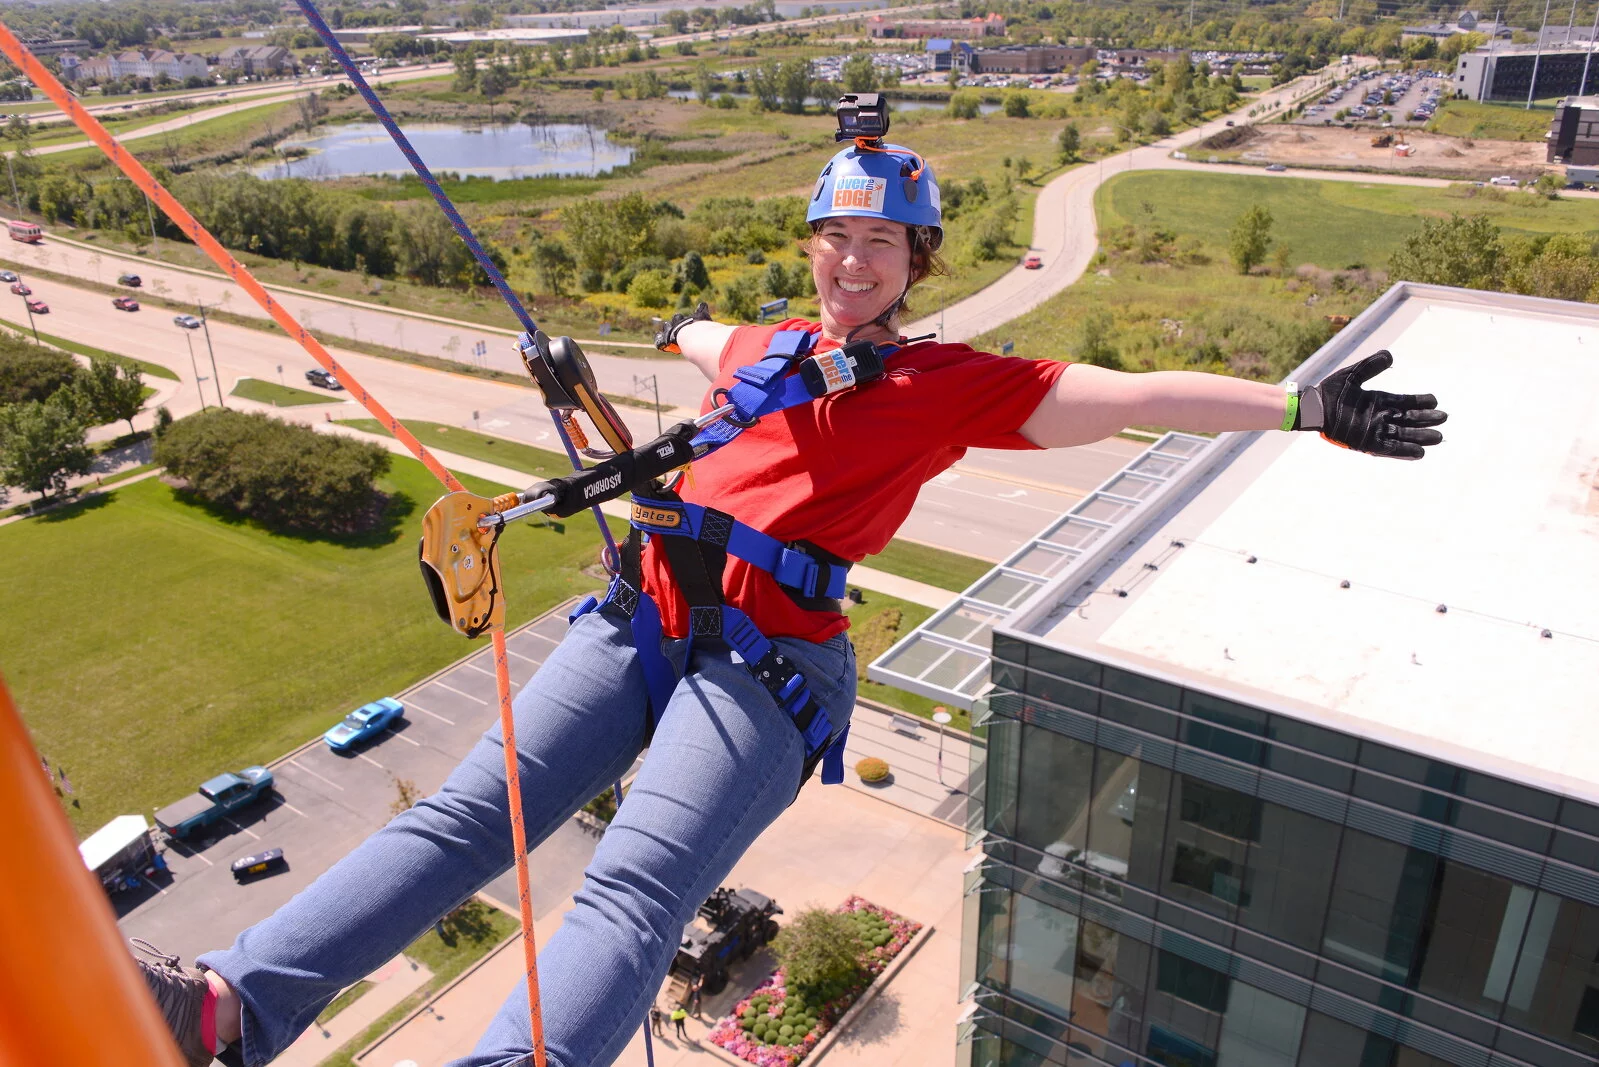 OSOT-America - Over The Edge - September 14, 2019 2022/06/Over-The-Edge-OSOT-Sept-2019-6_Alison-Grumbles.jpg 